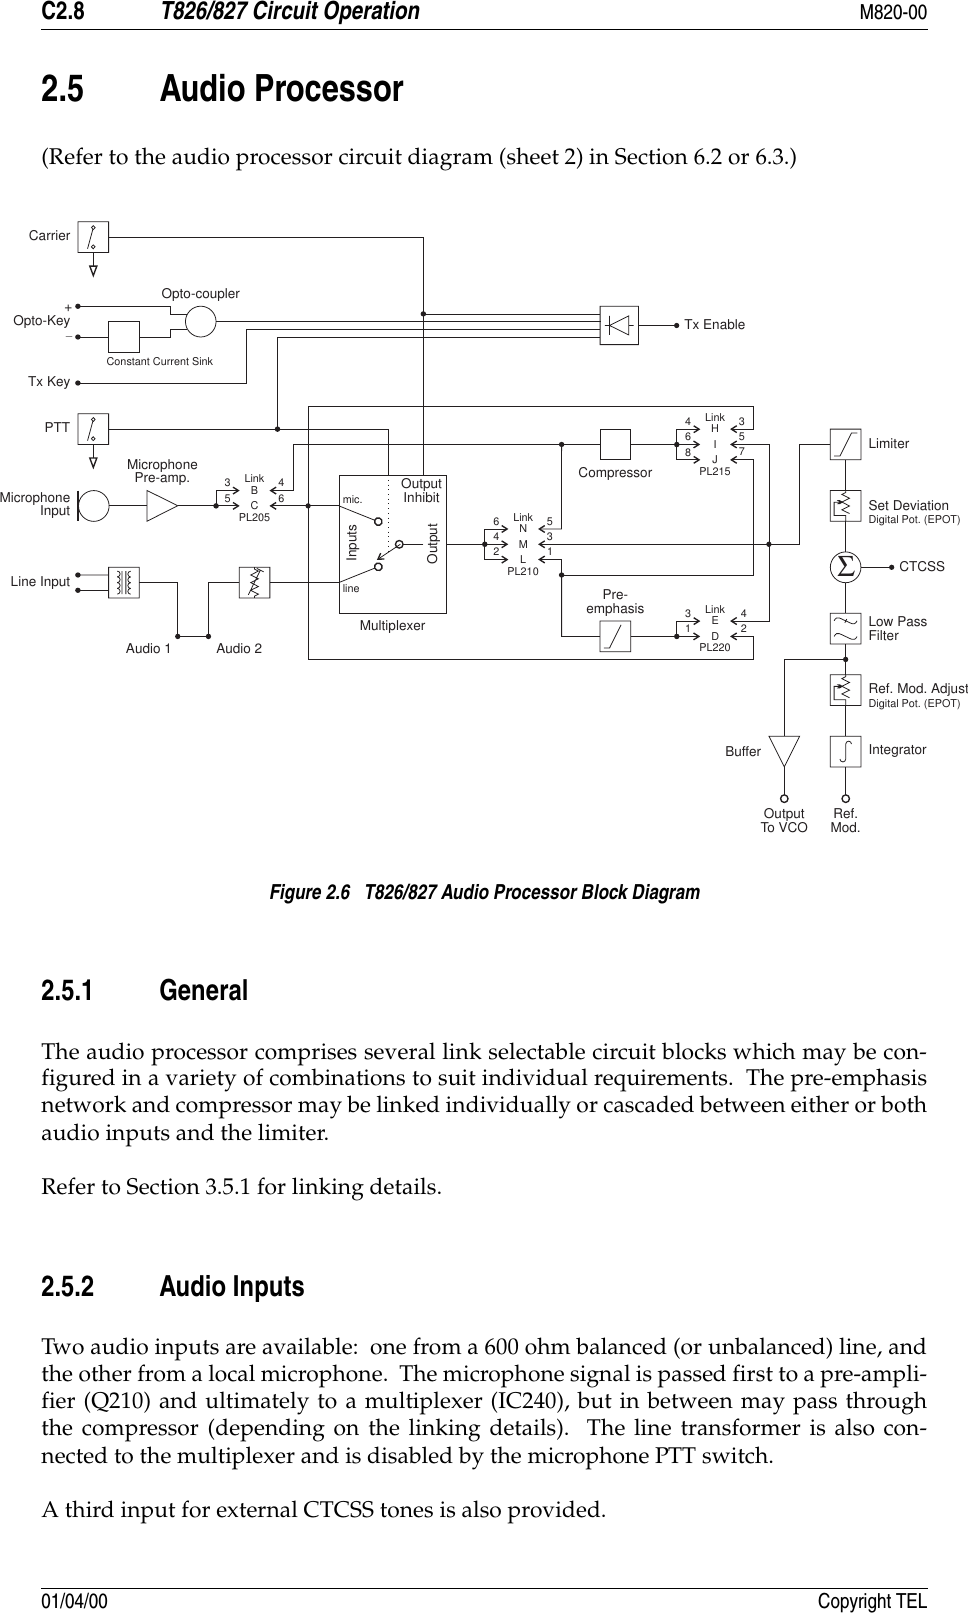 C2.8 T826/827 Circuit Operation M820-0001/04/00 Copyright TEL2.5 Audio Processor(Refer to the audio processor circuit diagram (sheet 2) in Section 6.2 or 6.3.)Figure 2.6   T826/827 Audio Processor Block Diagram2.5.1 GeneralThe audio processor comprises several link selectable circuit blocks which may be con-figured in a variety of combinations to suit individual requirements.  The pre-emphasisnetwork and compressor may be linked individually or cascaded between either or bothaudio inputs and the limiter.Refer to Section 3.5.1 for linking details.2.5.2 Audio InputsTwo audio inputs are available:  one from a 600 ohm balanced (or unbalanced) line, andthe other from a local microphone.  The microphone signal is passed first to a pre-ampli-fier (Q210) and ultimately to a multiplexer (IC240), but in between may pass throughthe compressor (depending on the linking details).  The line transformer is also con-nected to the multiplexer and is disabled by the microphone PTT switch.A third input for external CTCSS tones is also provided.Pre-emphasis346BC56434253357128NHMIELJD461mic.lineMultiplexerInputsOutputOutputInhibitAudio 1 Audio 2CompressorLinkLinkLinkTx EnableΣCarrierOpto-KeyTx KeyPTTMicrophoneInputLine InputMicrophonePre-amp.Opto-couplerLinkPL205PL215PL220PL210LimiterSet DeviationCTCSSLow PassFilterRef. Mod. AdjustIntegratorDigital Pot. (EPOT)Digital Pot. (EPOT)BufferOutputTo VCO Ref.Mod.Constant Current Sink+_